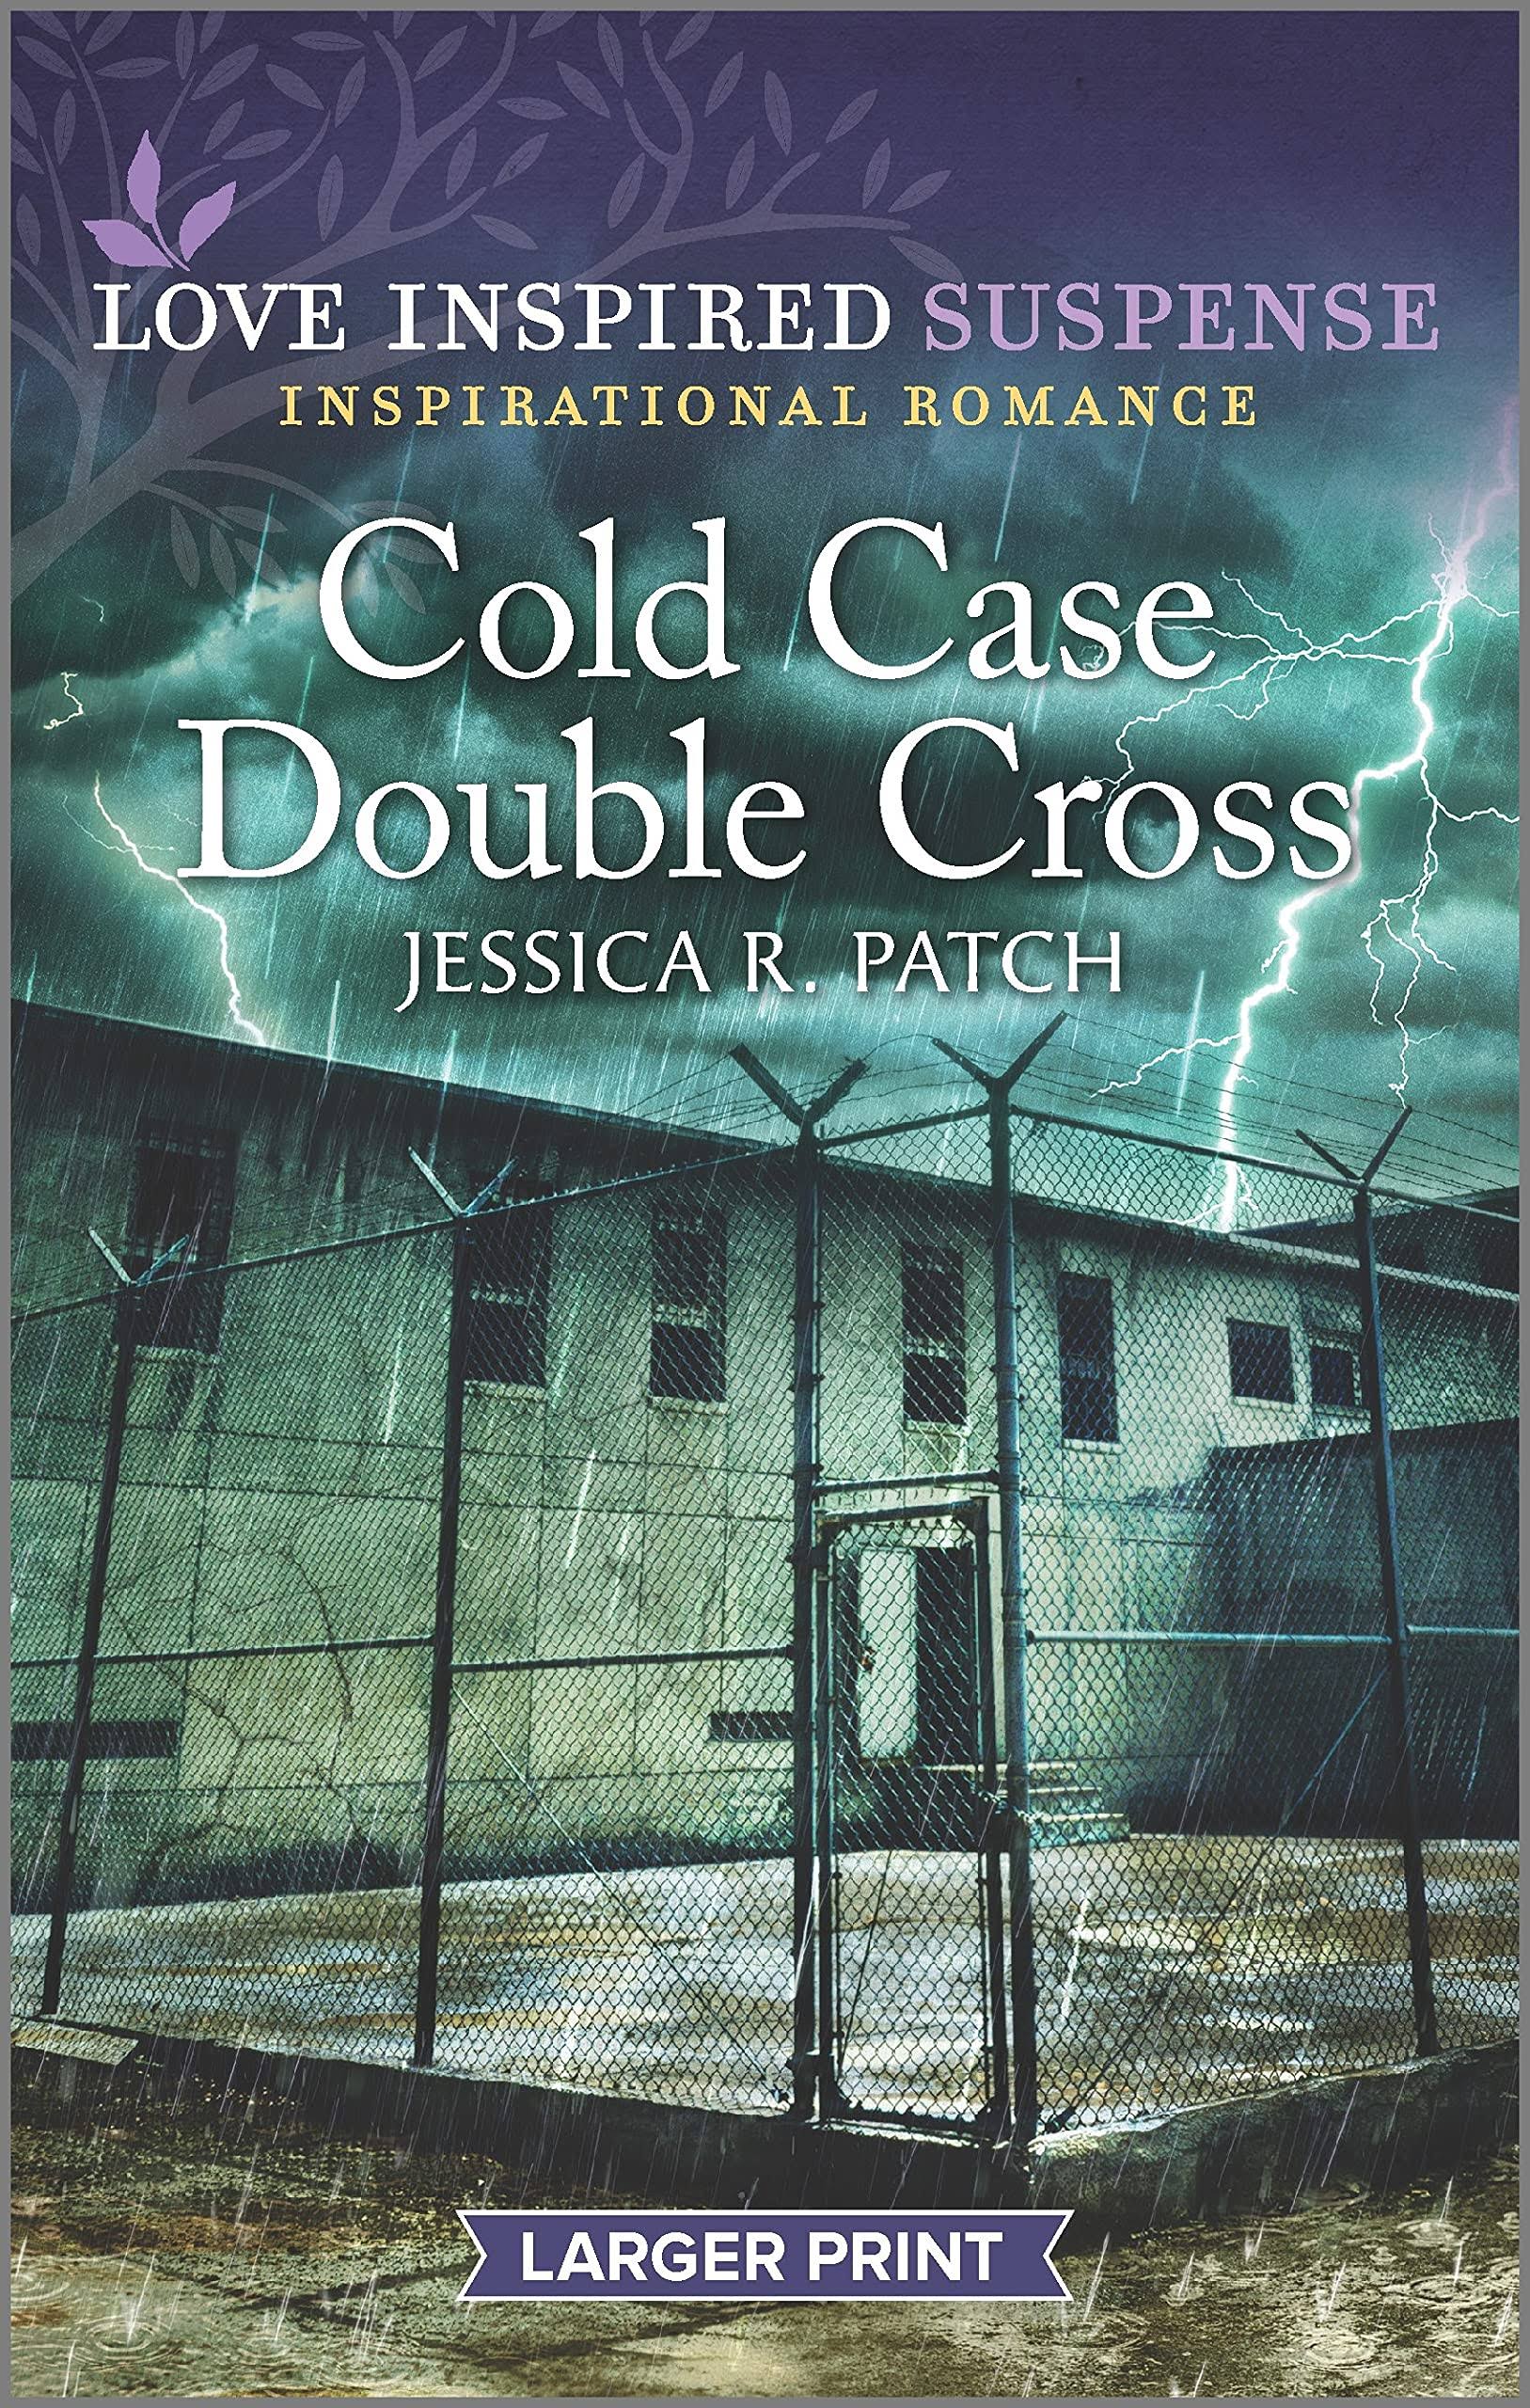 Cold Case Double Cross by Jessica R Patch